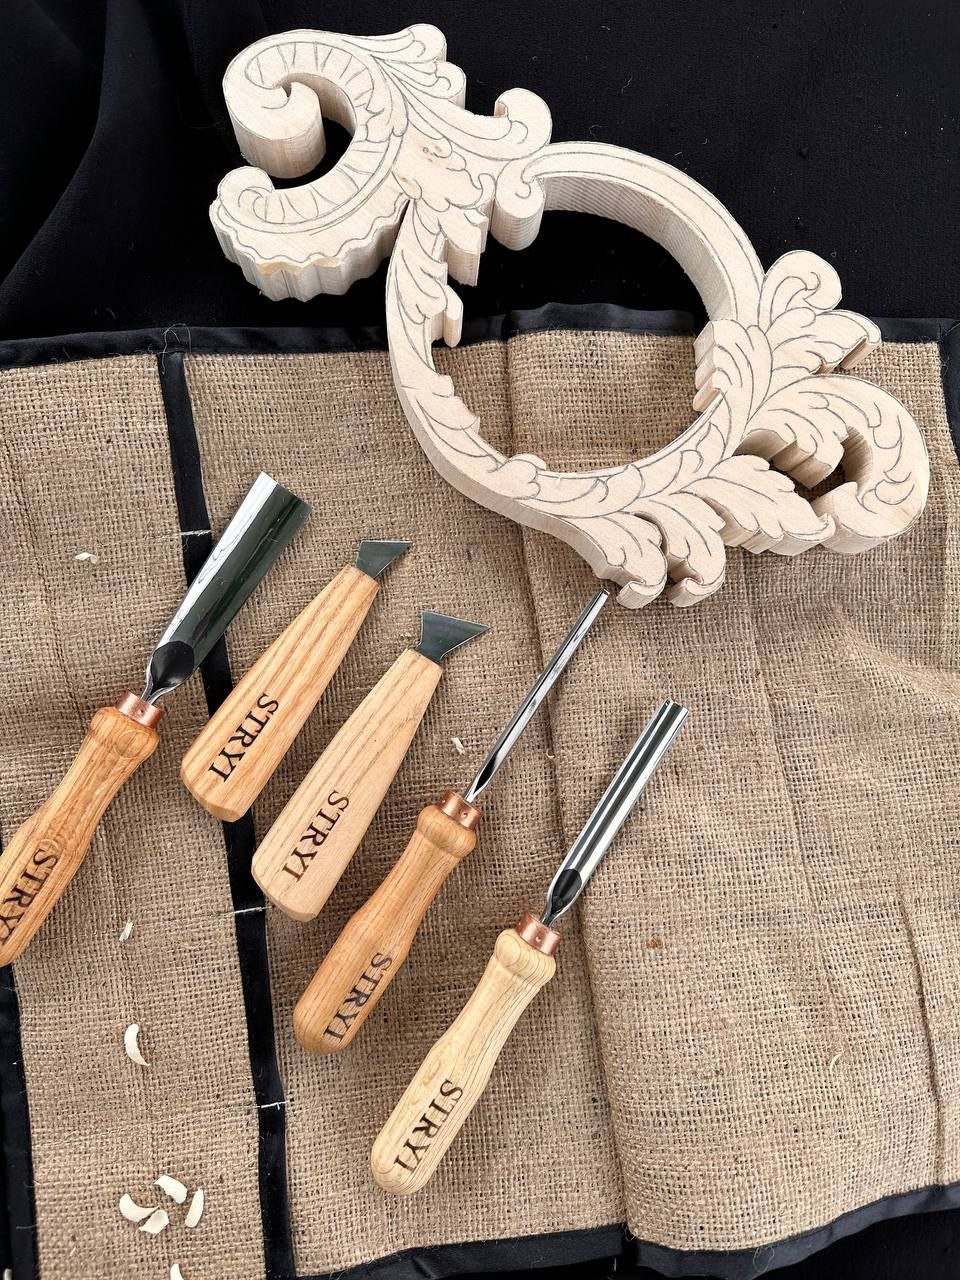 Basic wood carving tools set STRYI for whittling and relief